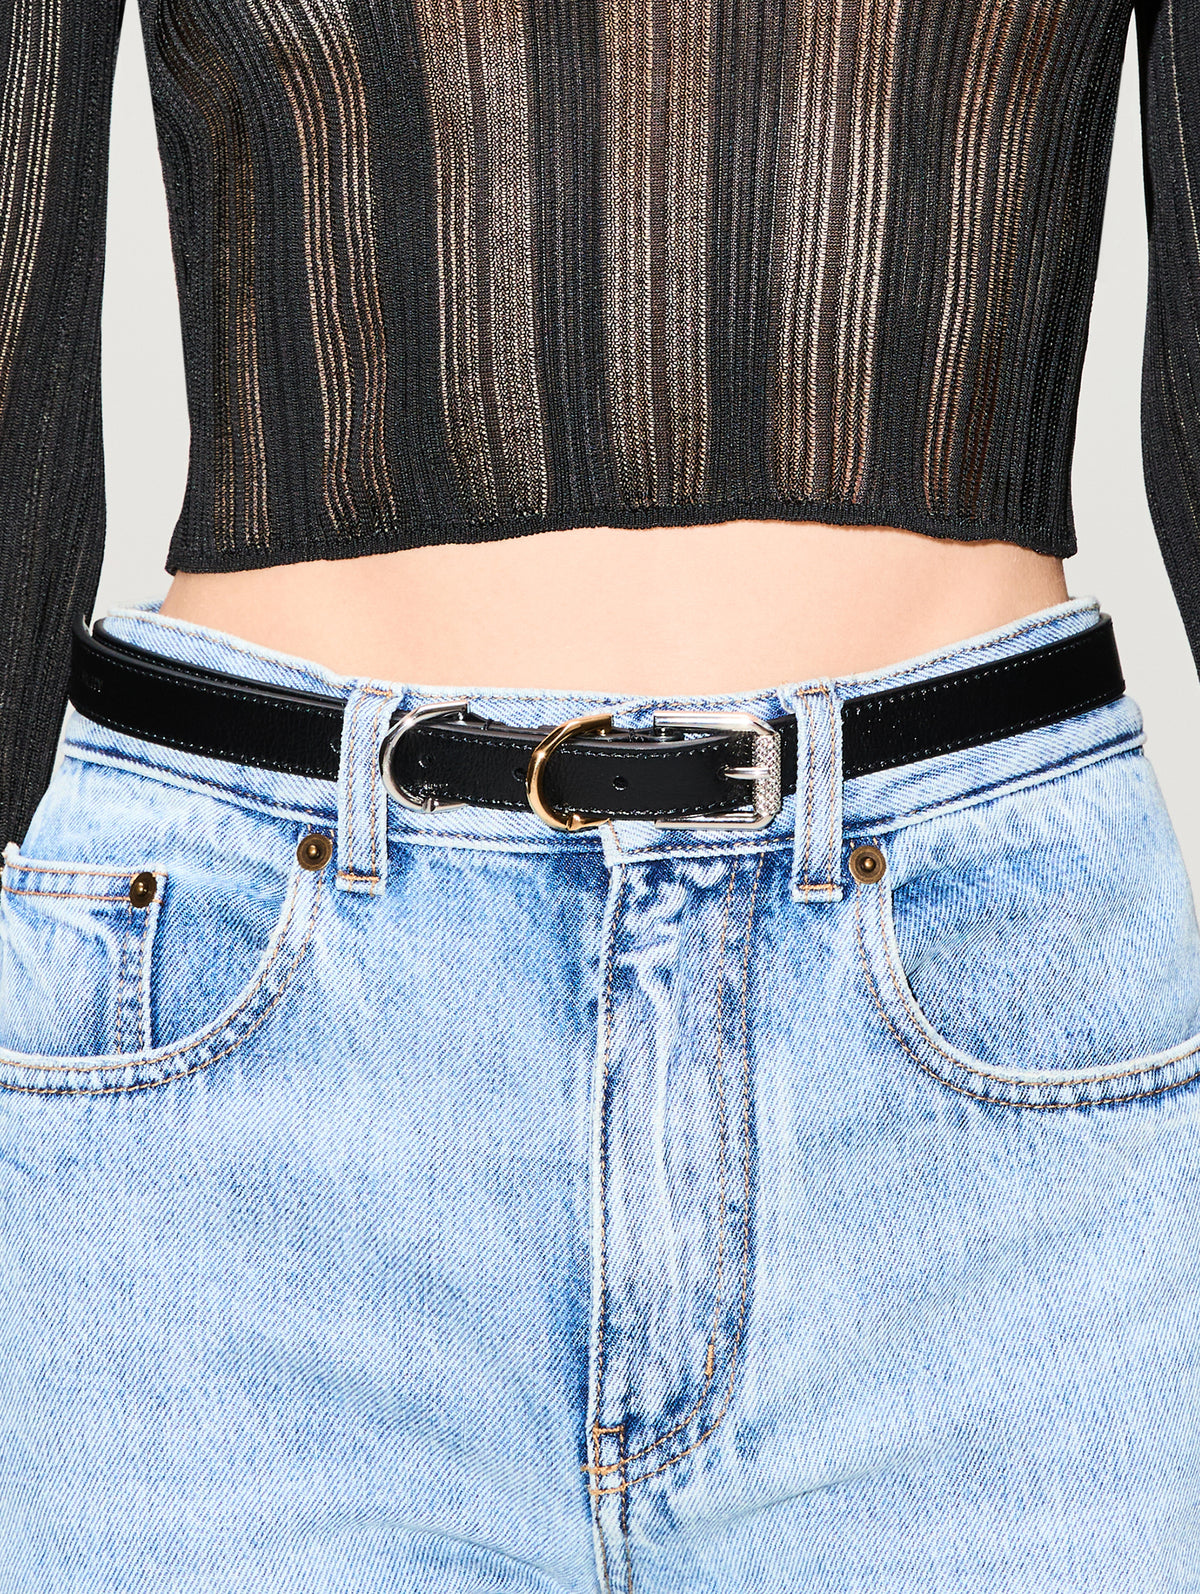 view 2 - Voyou One Buckle Belt